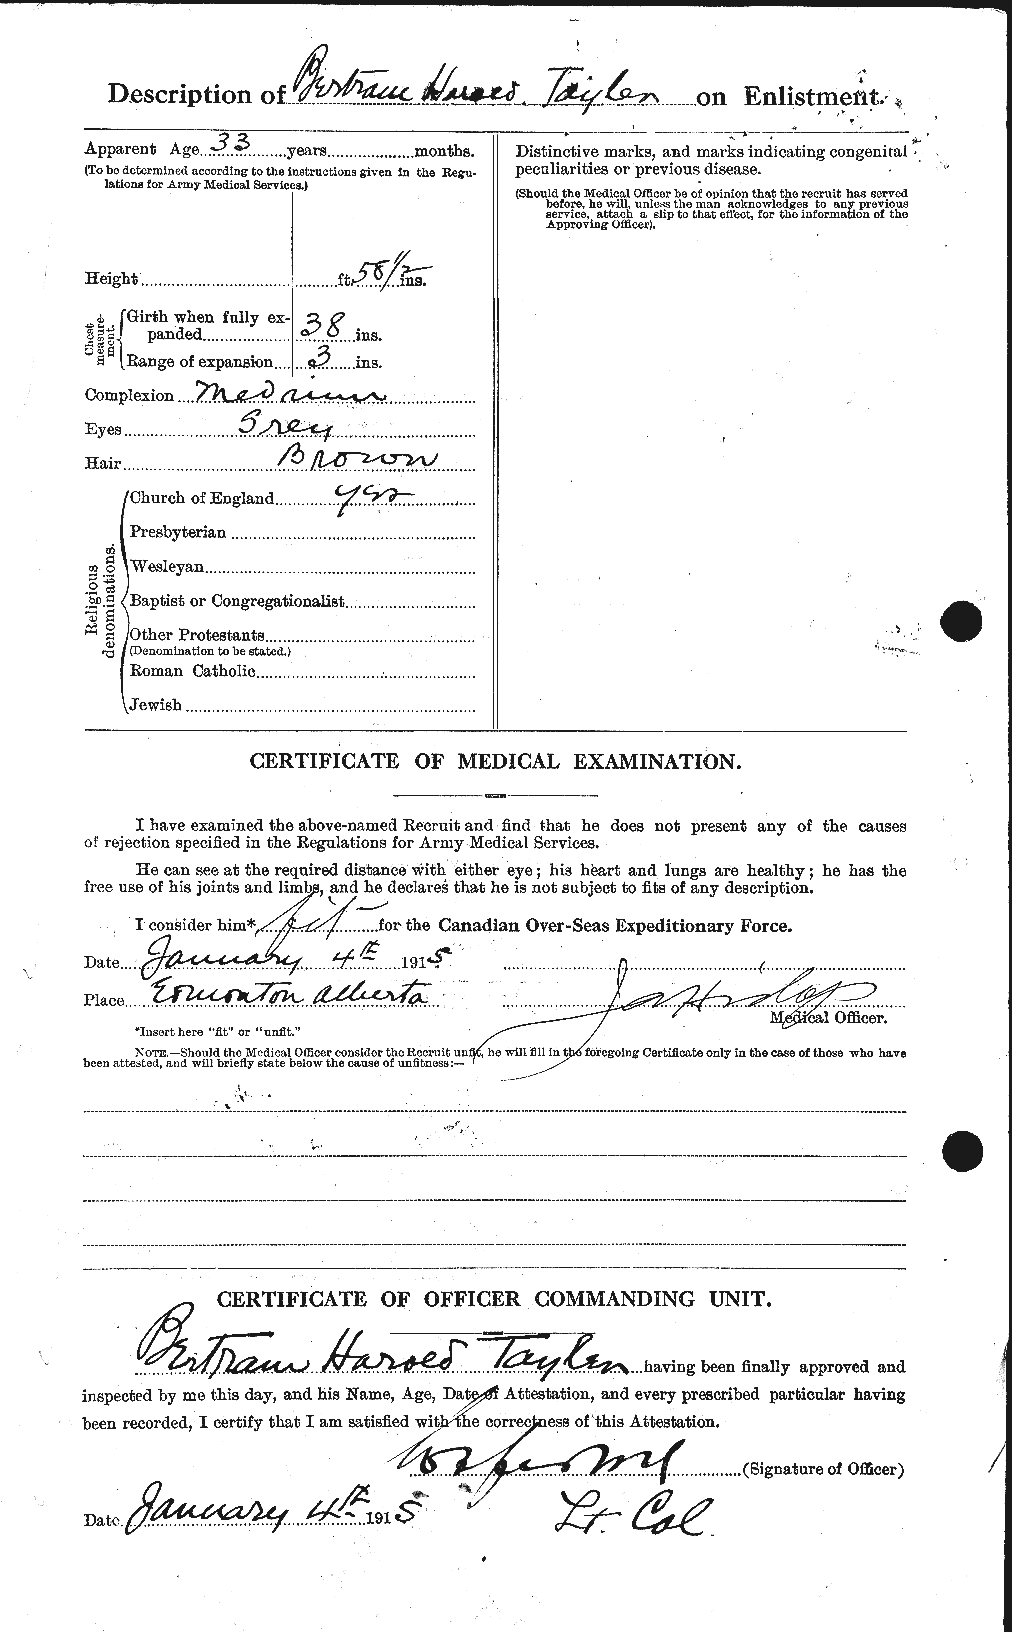 Personnel Records of the First World War - CEF 626060b